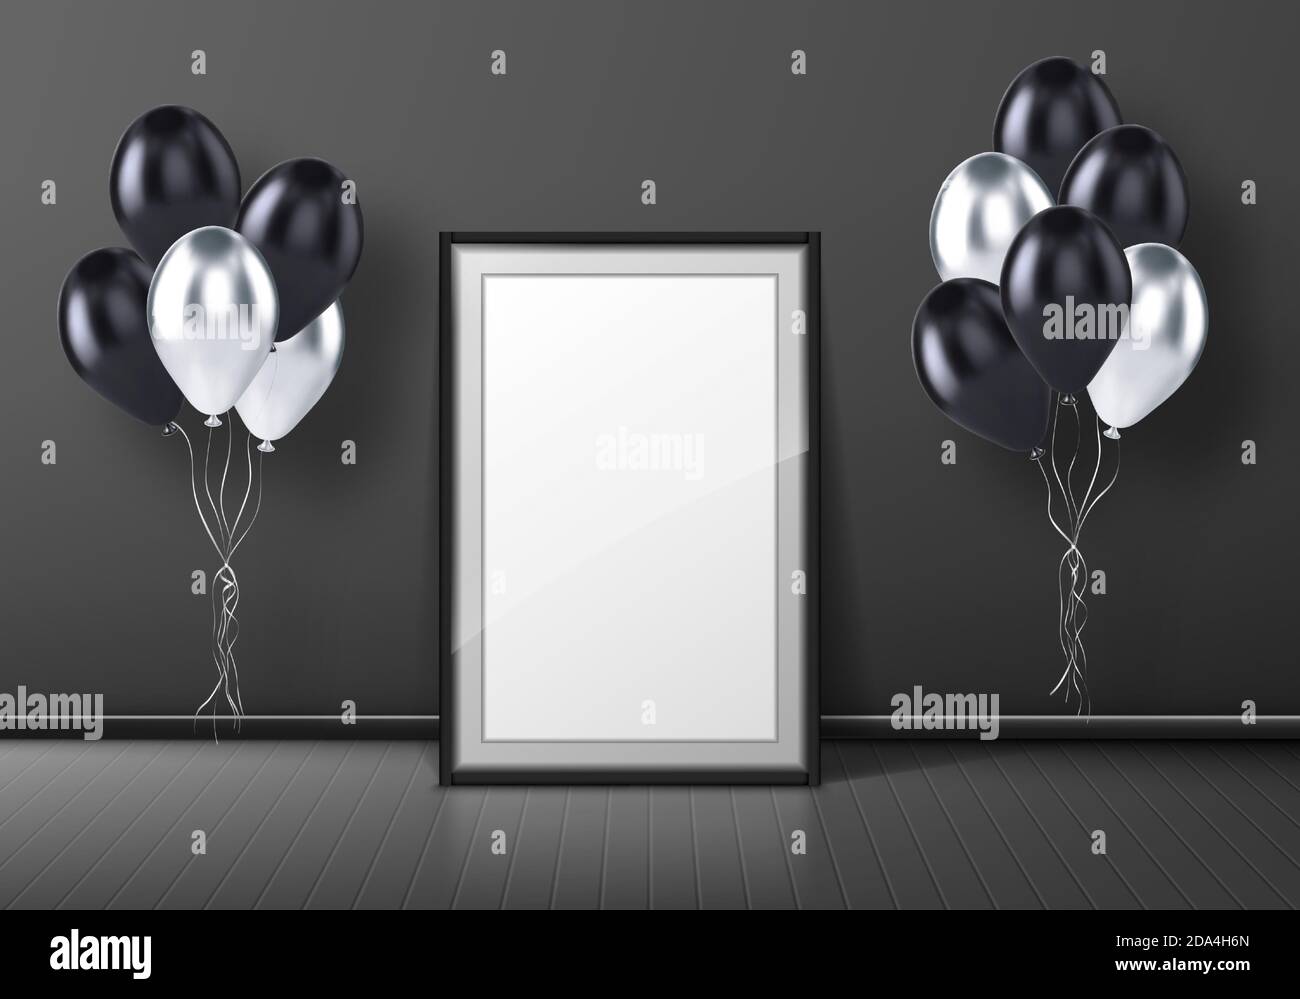 Black photo frame standing on floor in empty room with balloons. Vector realistic mockup of interior decoration with blank poster, white and black balloons for events in home, gallery or office Stock Vector